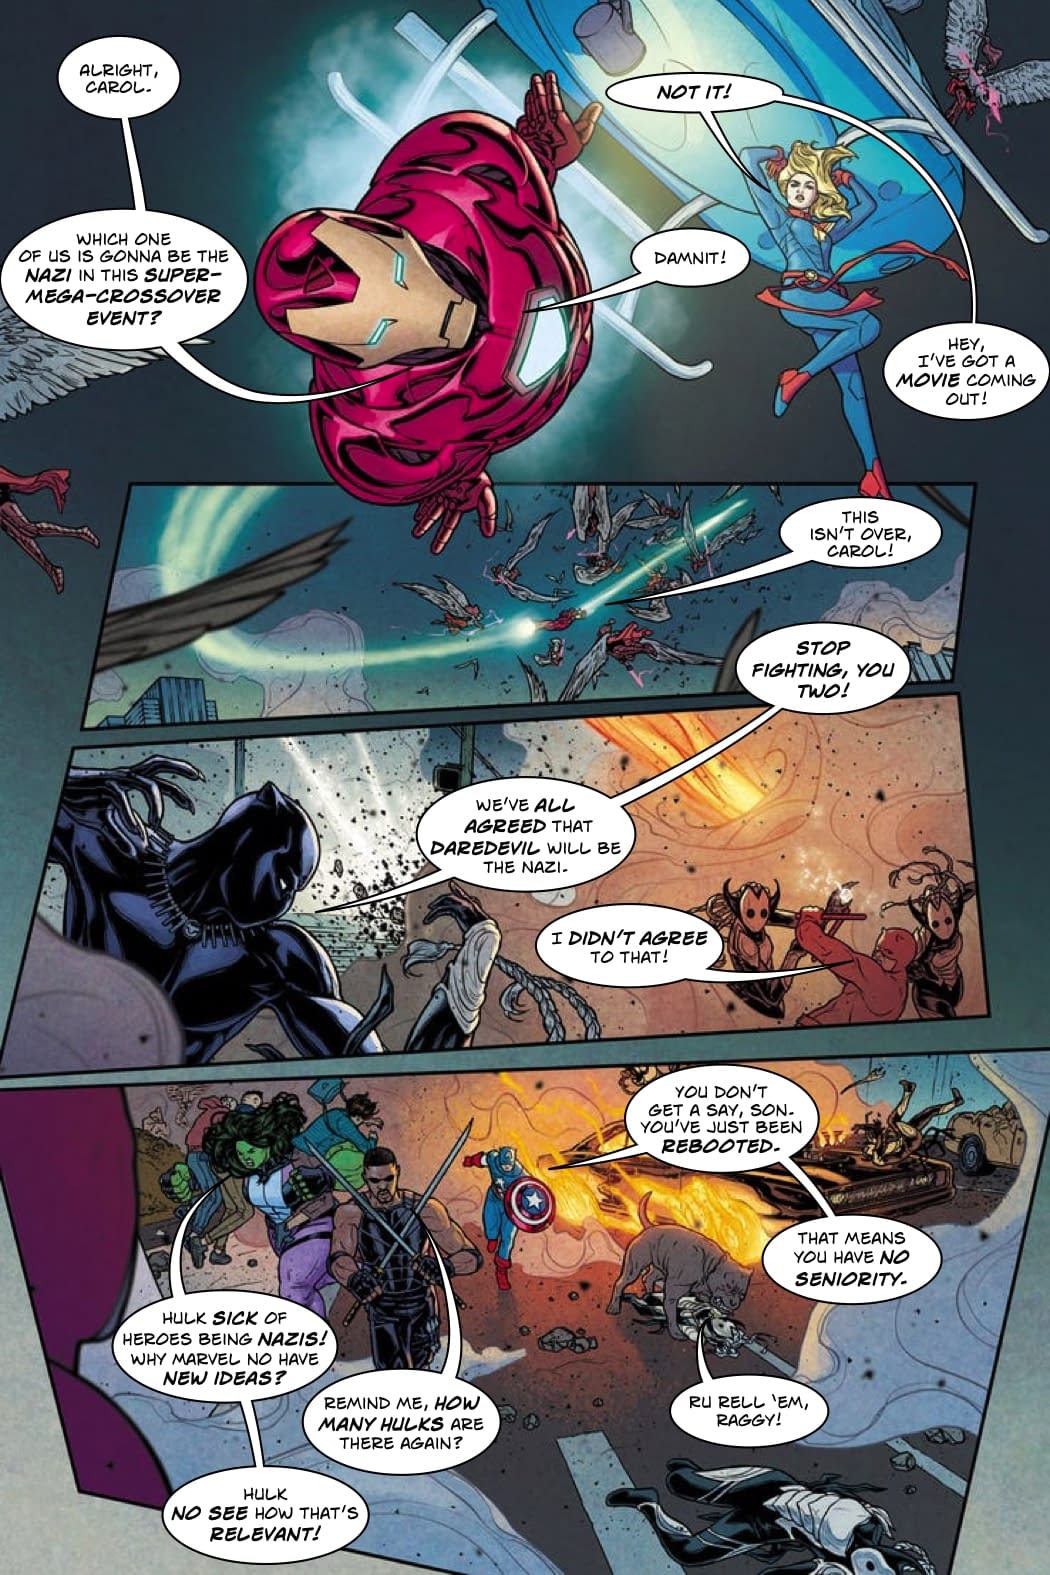 Who Gets to Be the Nazi in War of the Realms #1 [Improbable Previews]